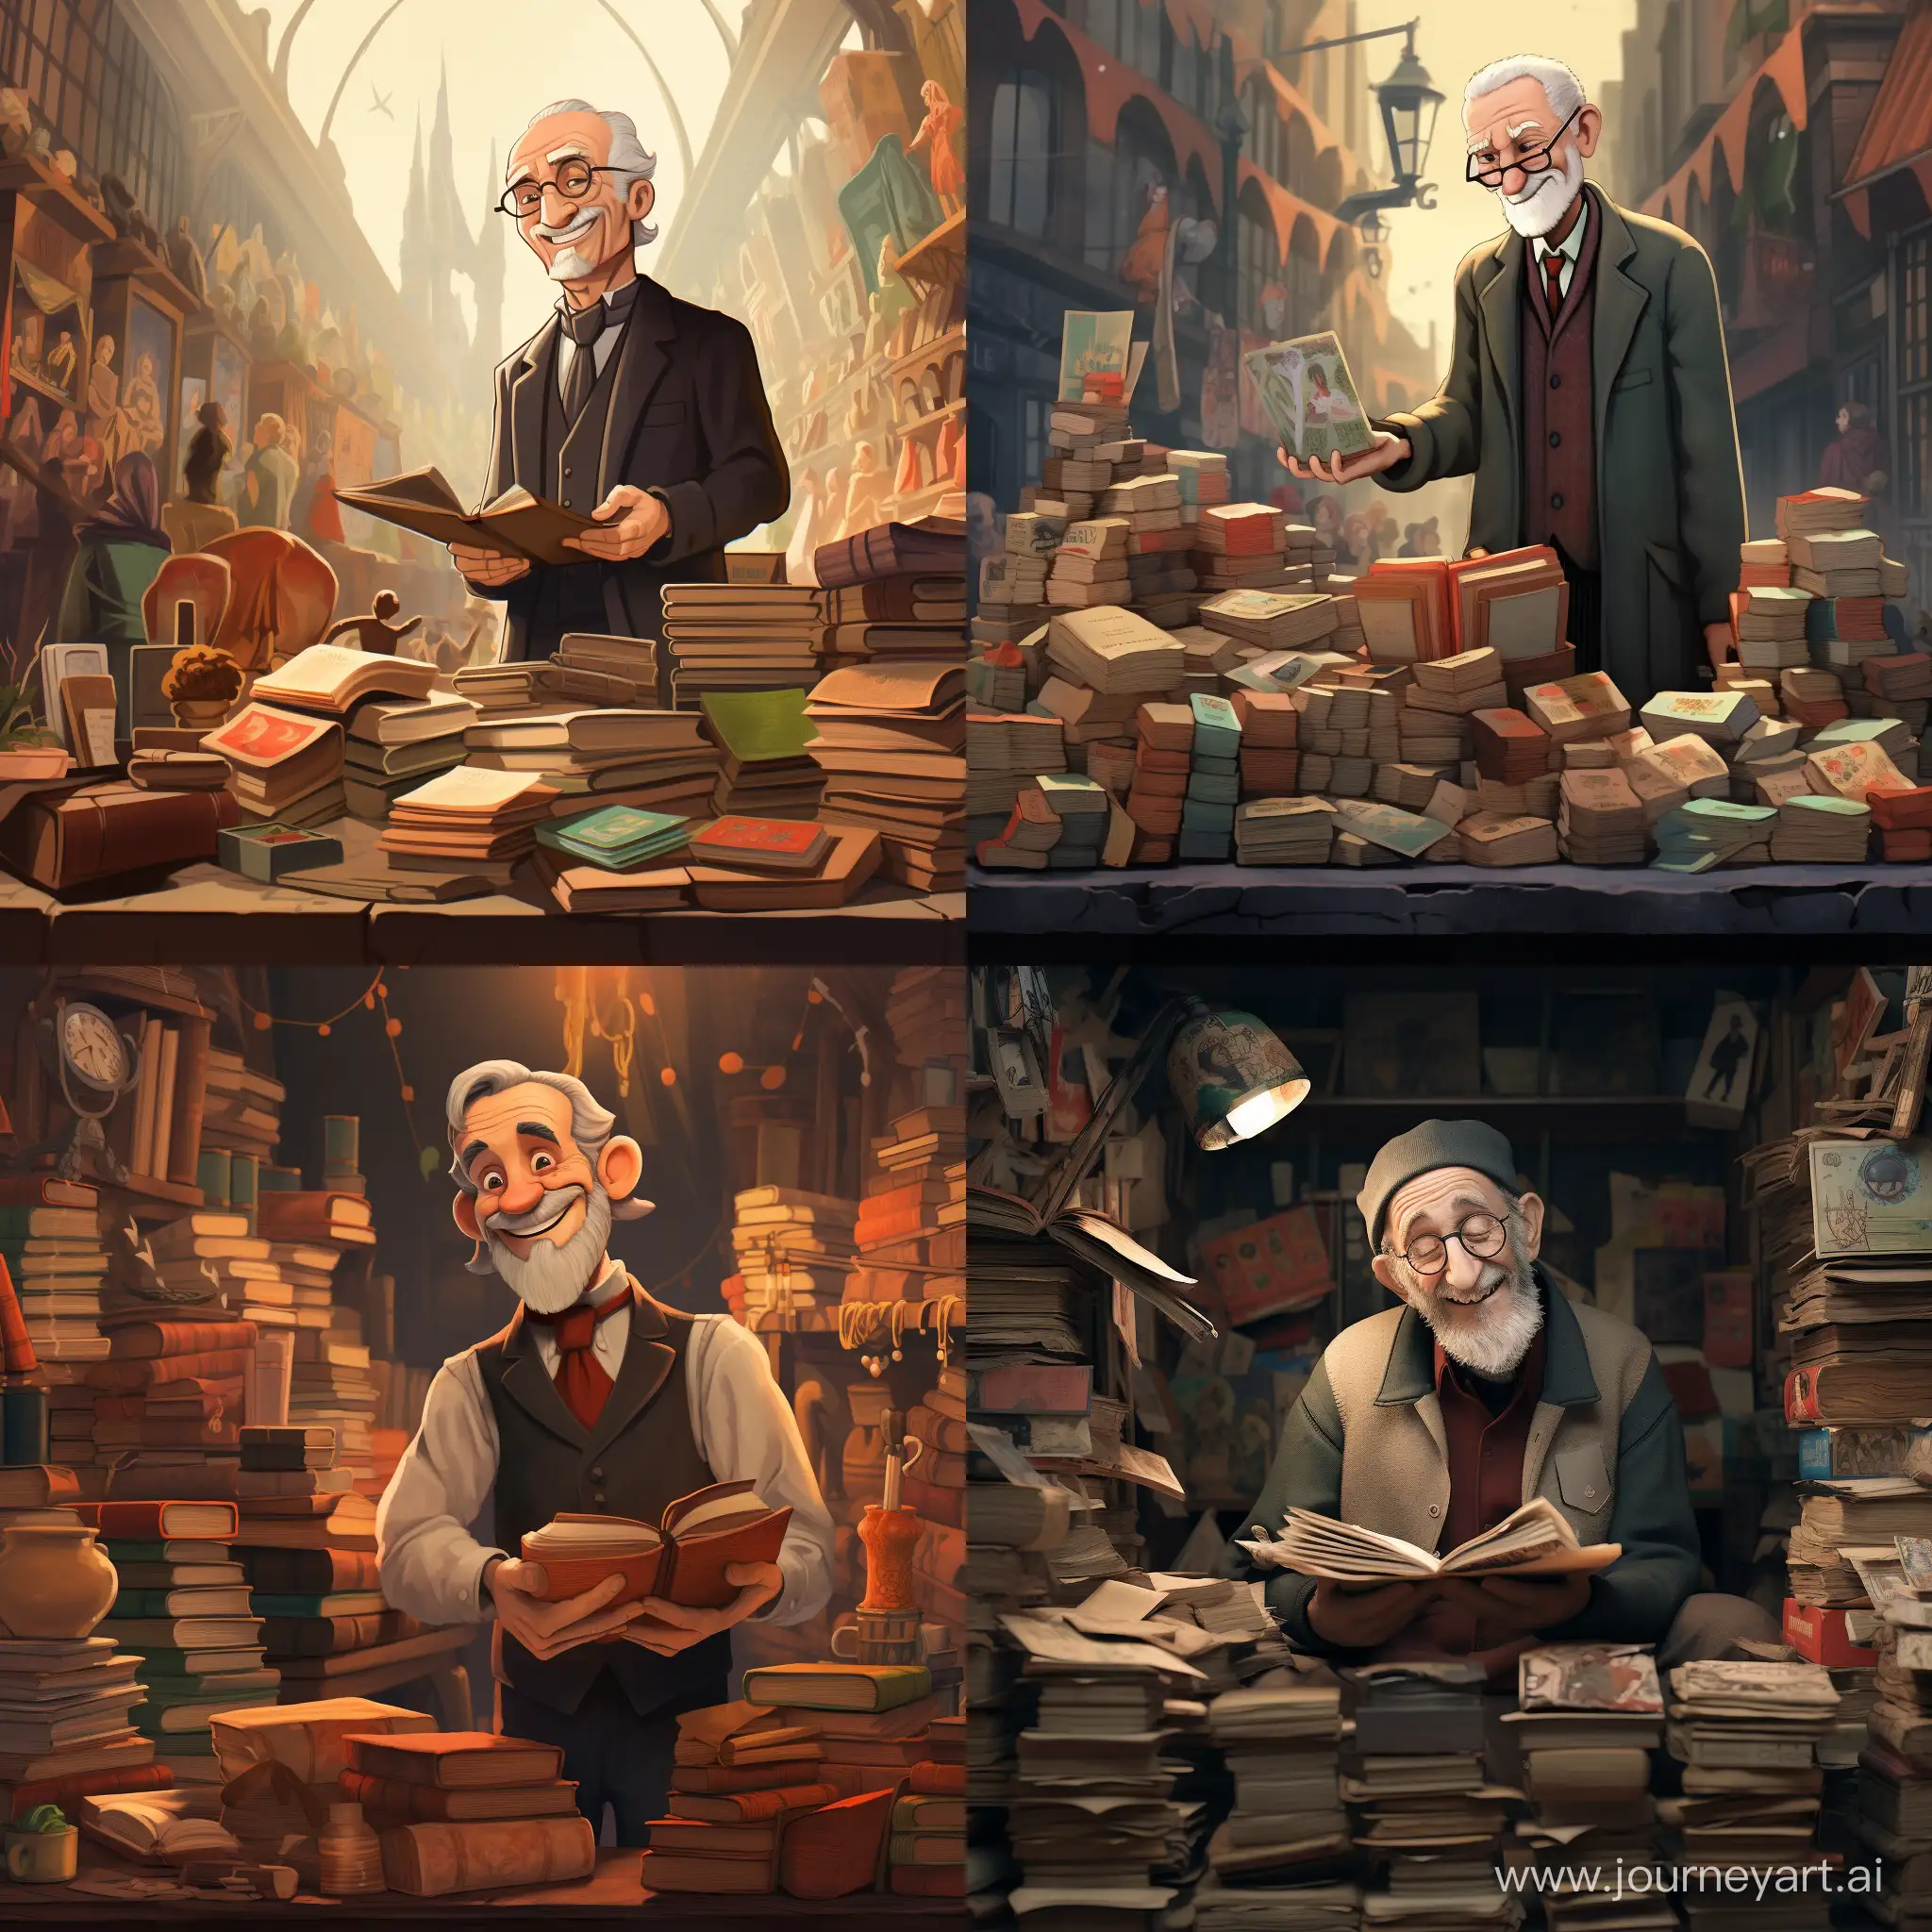 Charming-Book-Peddler-in-Animated-Display